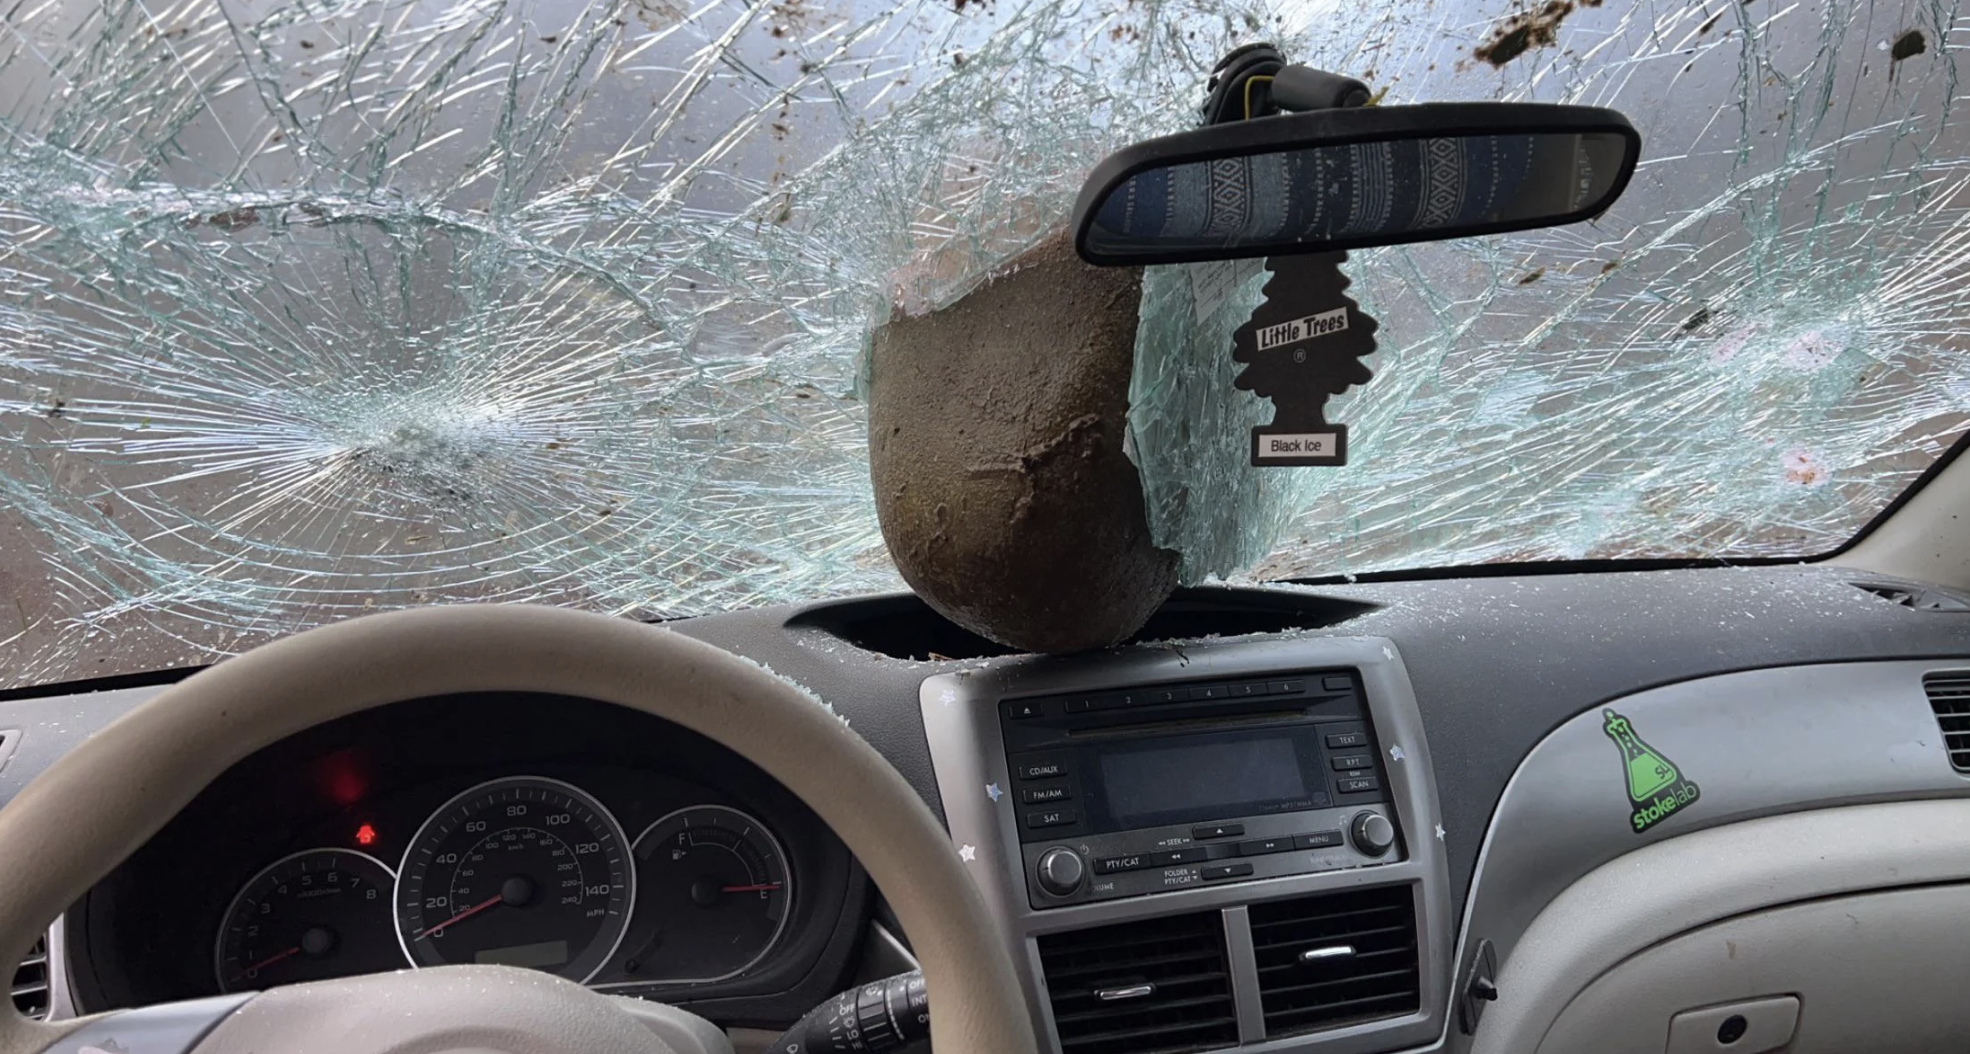 A photo from inside the car shows the rock crashed halfway through the windshield and into the interior